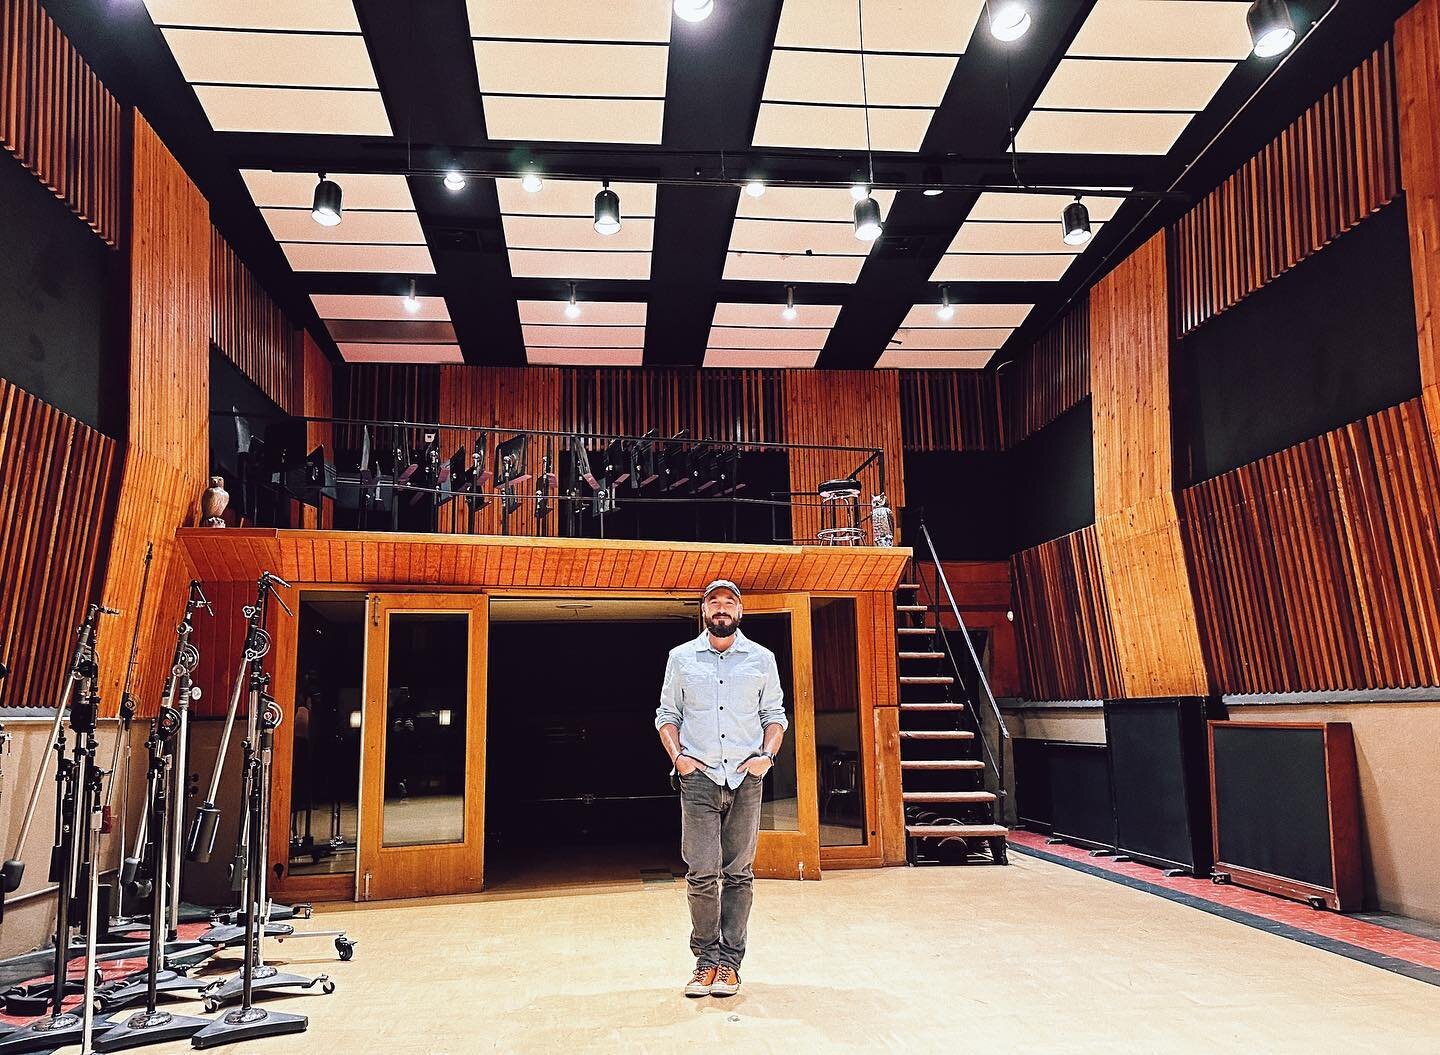 Recorded in one, peeked into three and stood for a photo in two- fun day at EastWest Studios. It&rsquo;s wild to think what these rooms have heard over the years.